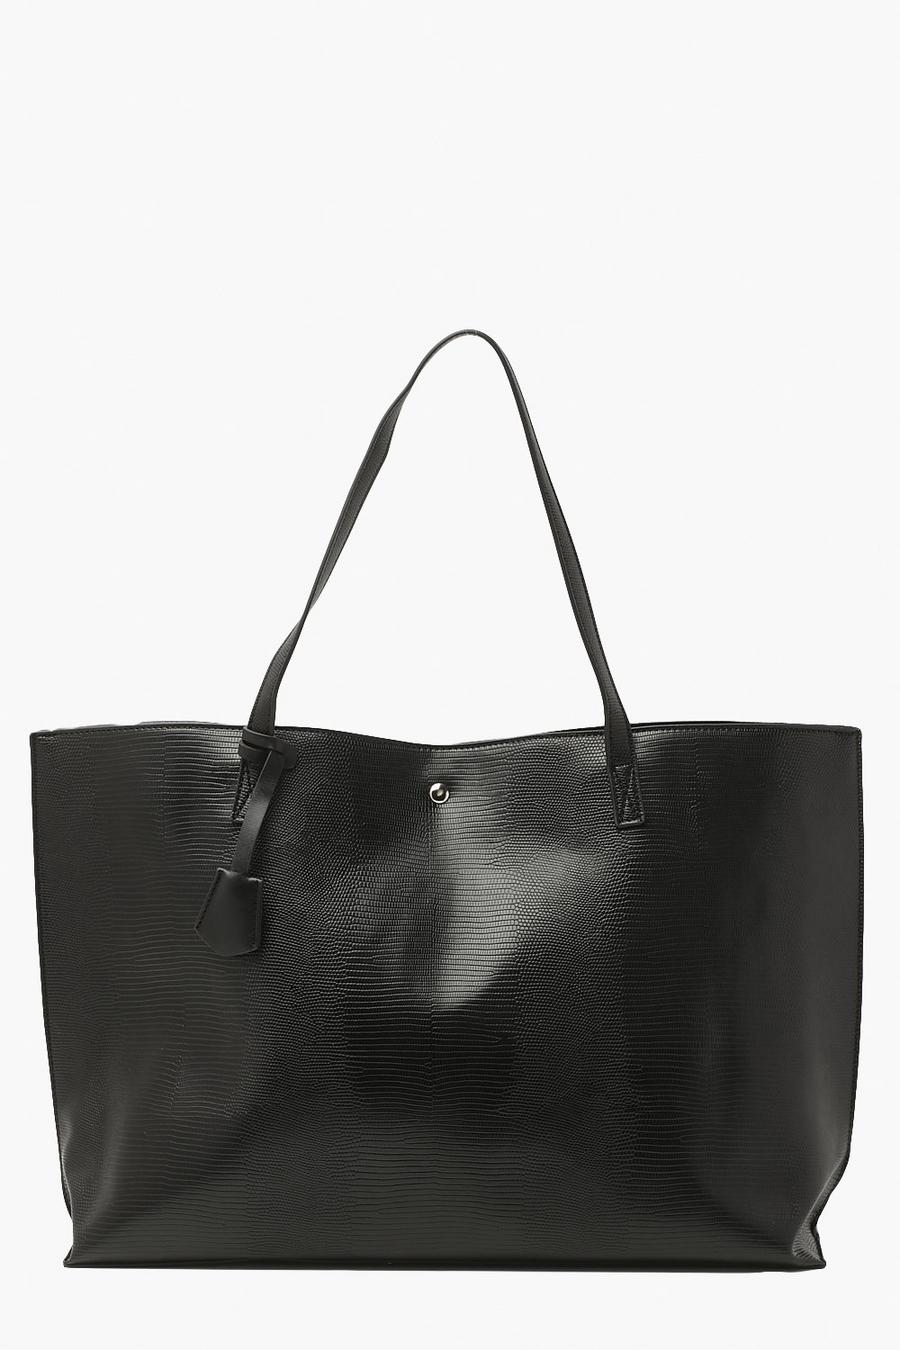 Black Faux Leather Textured Tote Bag image number 1